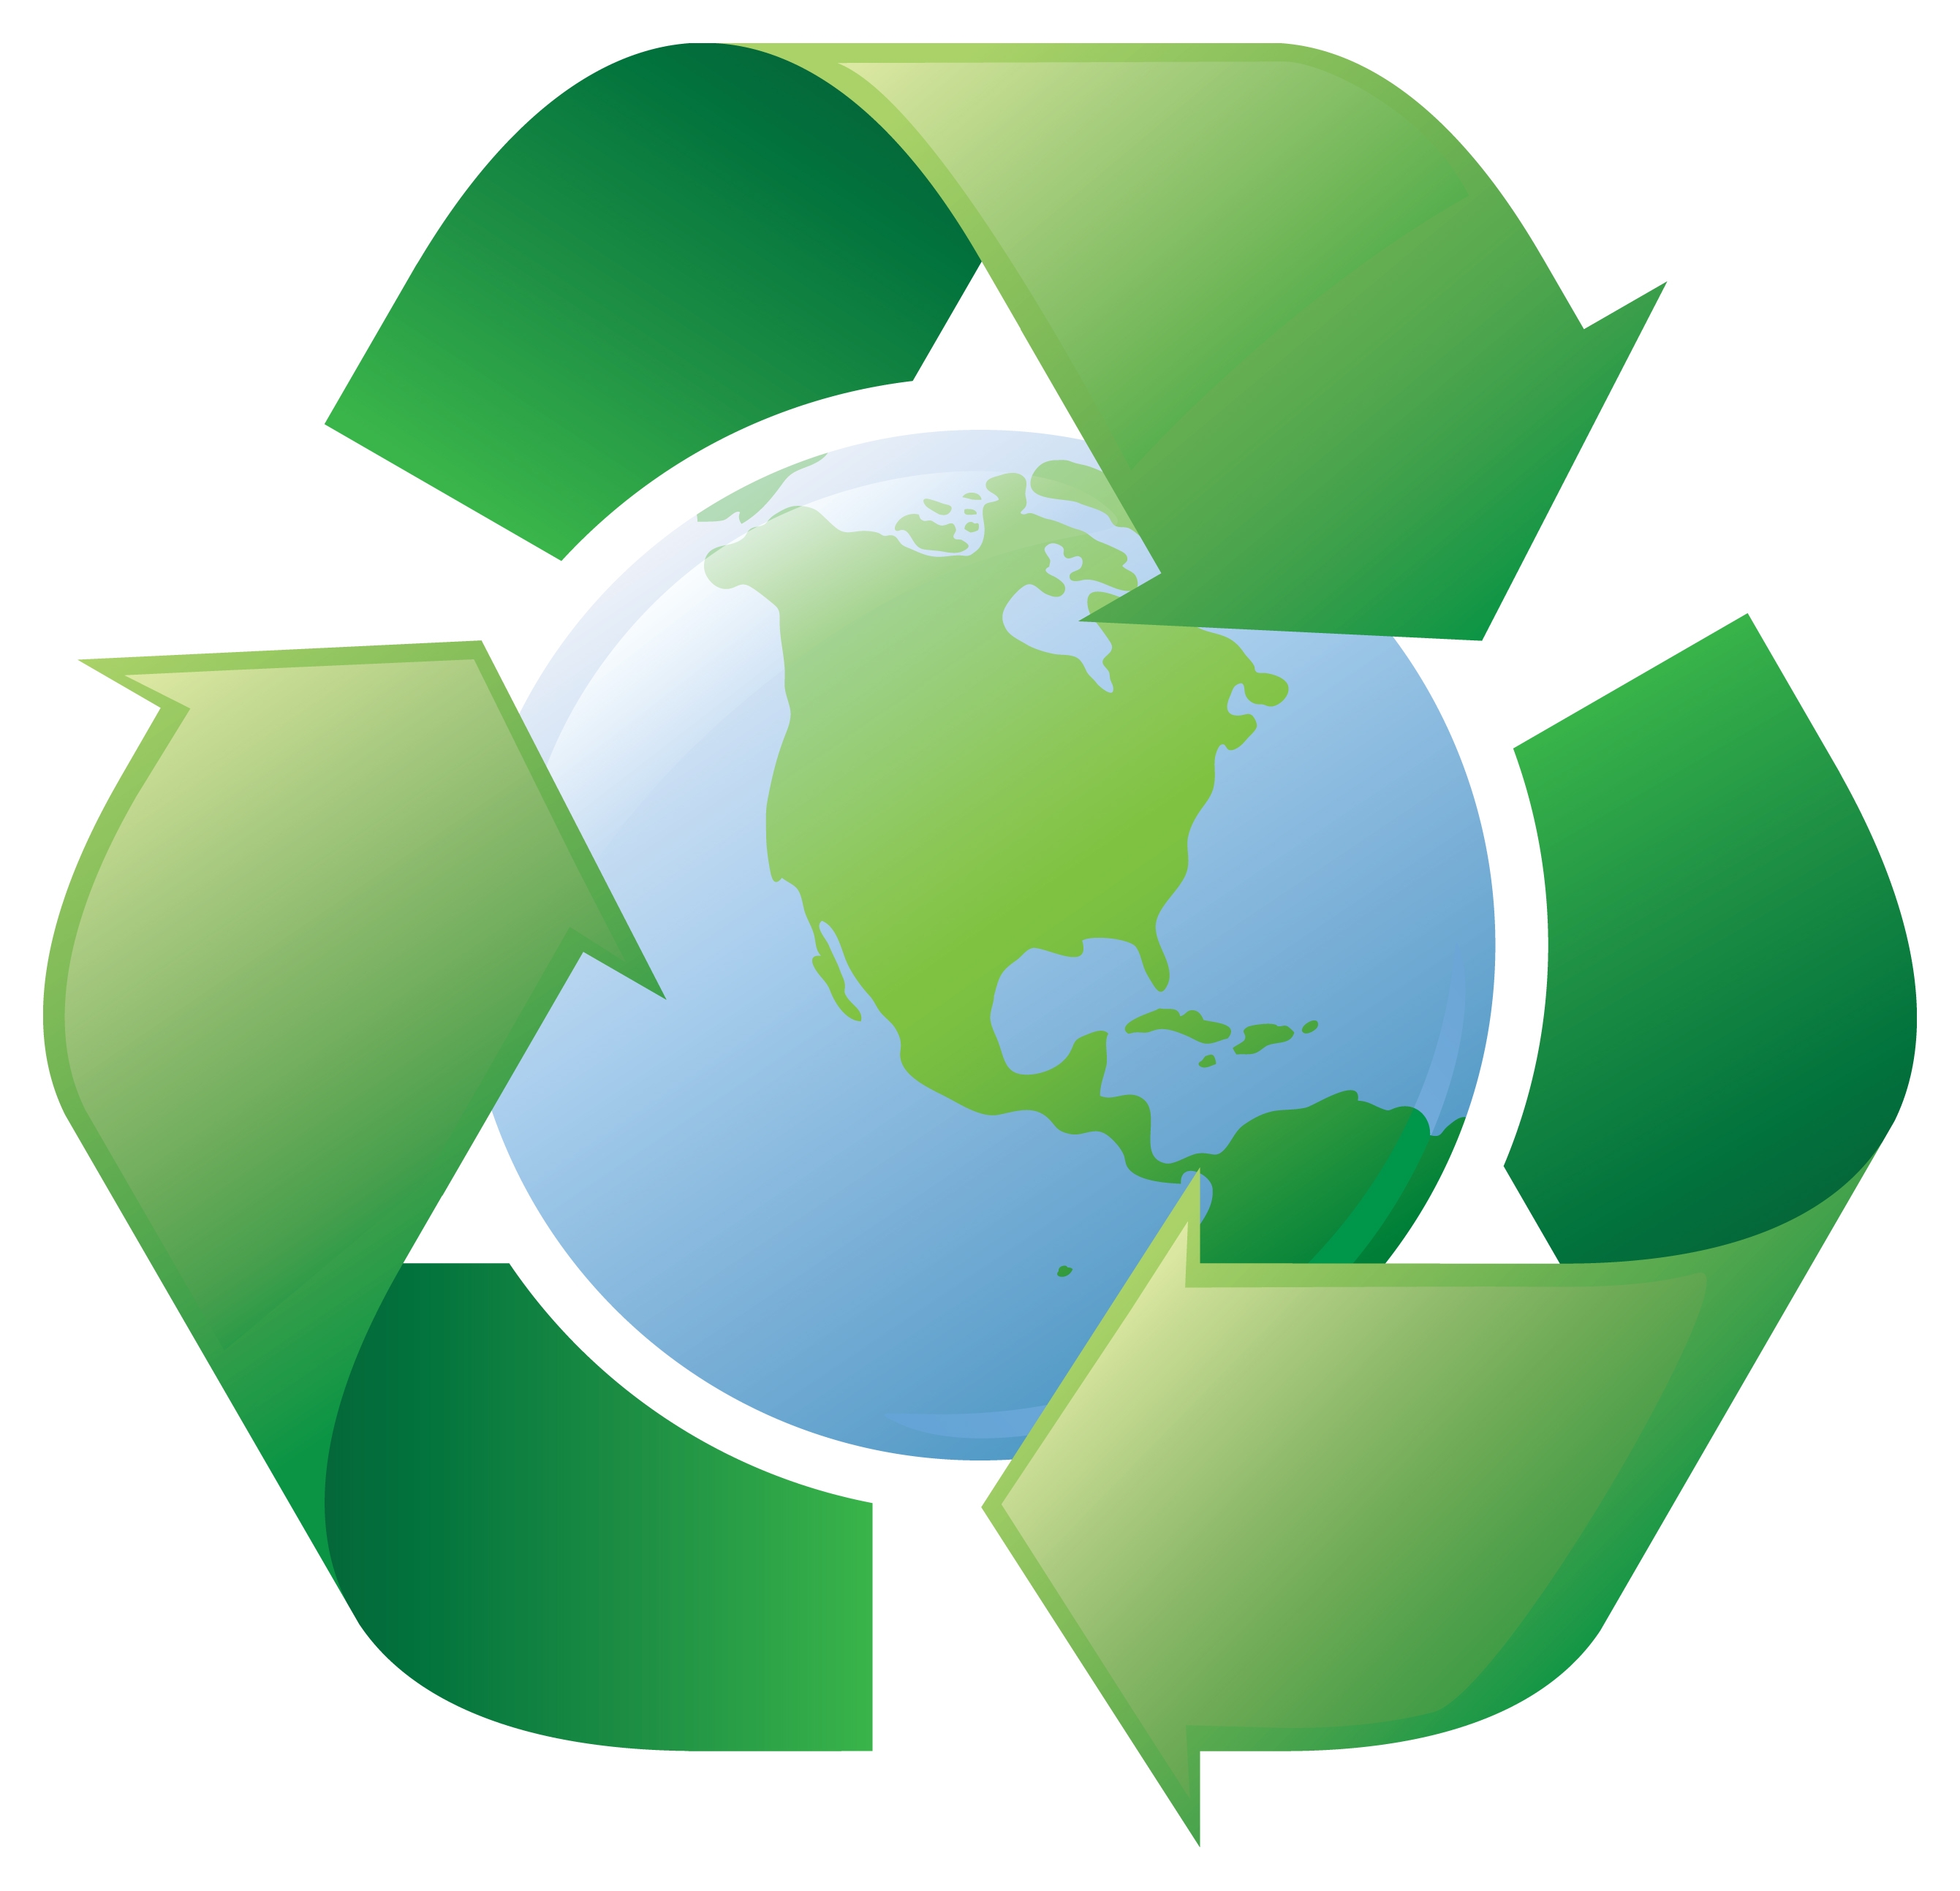 Recycle sign clip art